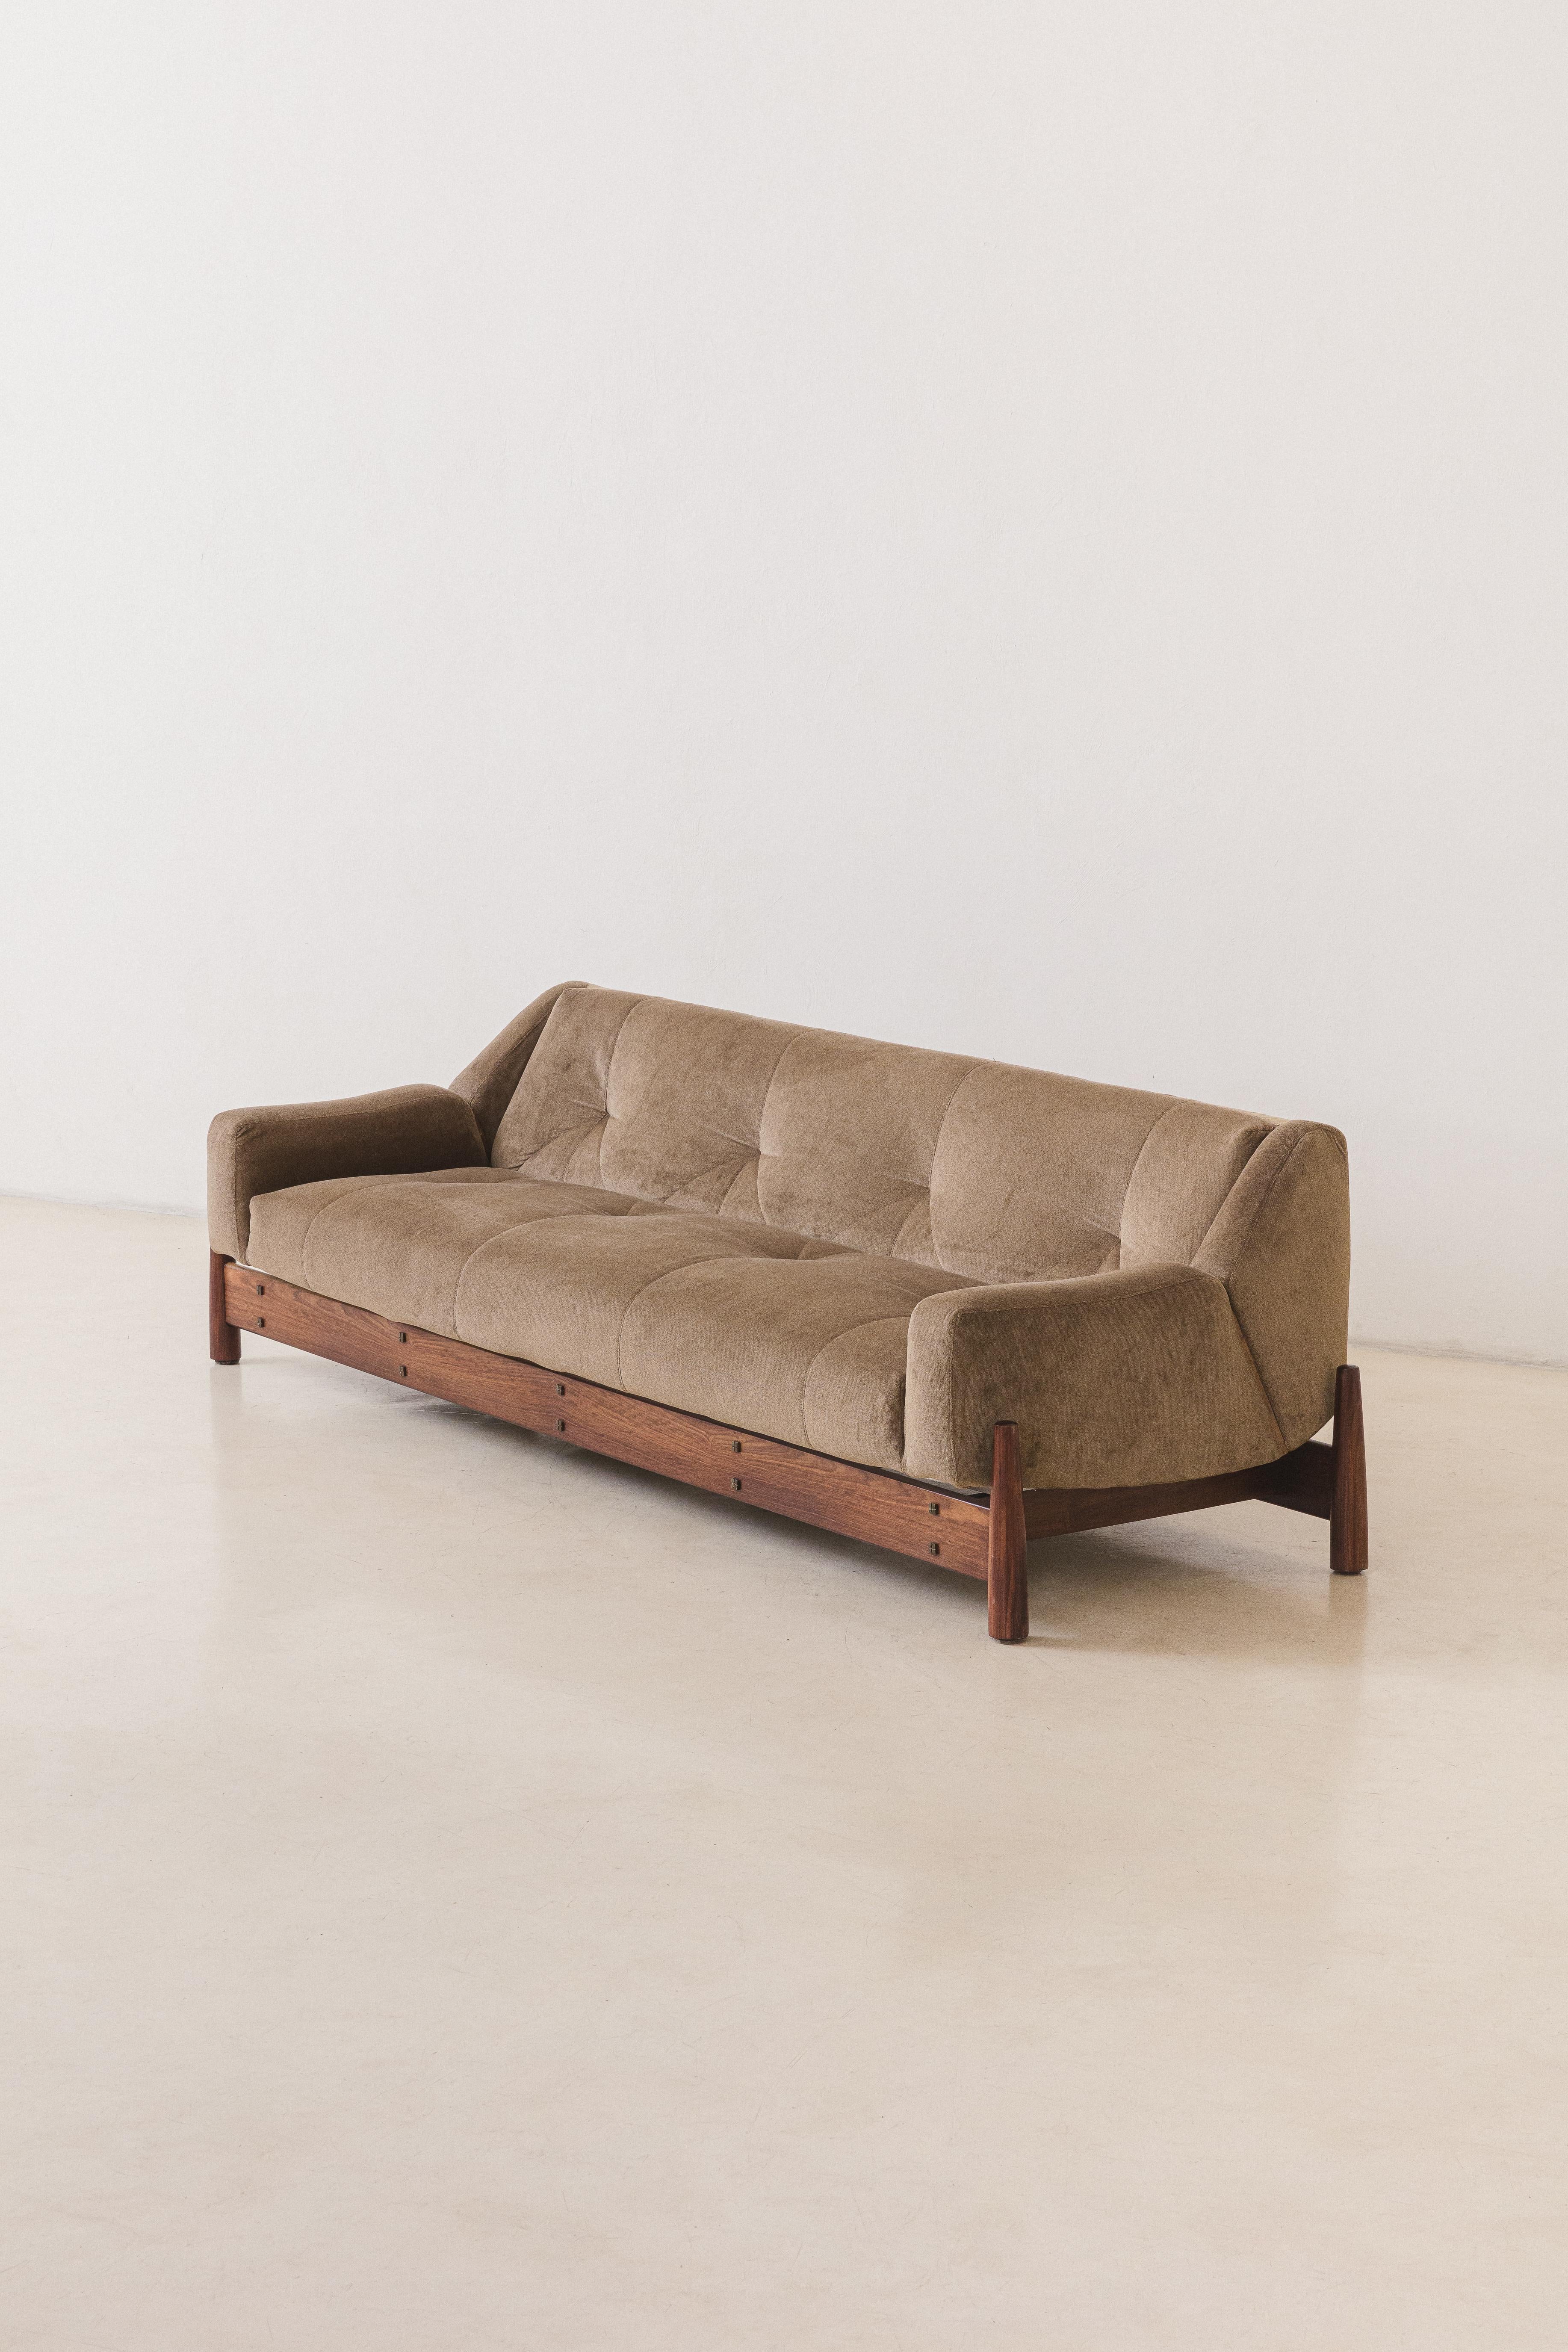 This Imbuia Sofa was manufactured in the 1960s by the Brazilian company Móveis Cimo, a pioneer in Brazilian furniture industrialization.

Cimo Sofa is very charming, presenting the seat and backrest as a single piece that seems to float over the